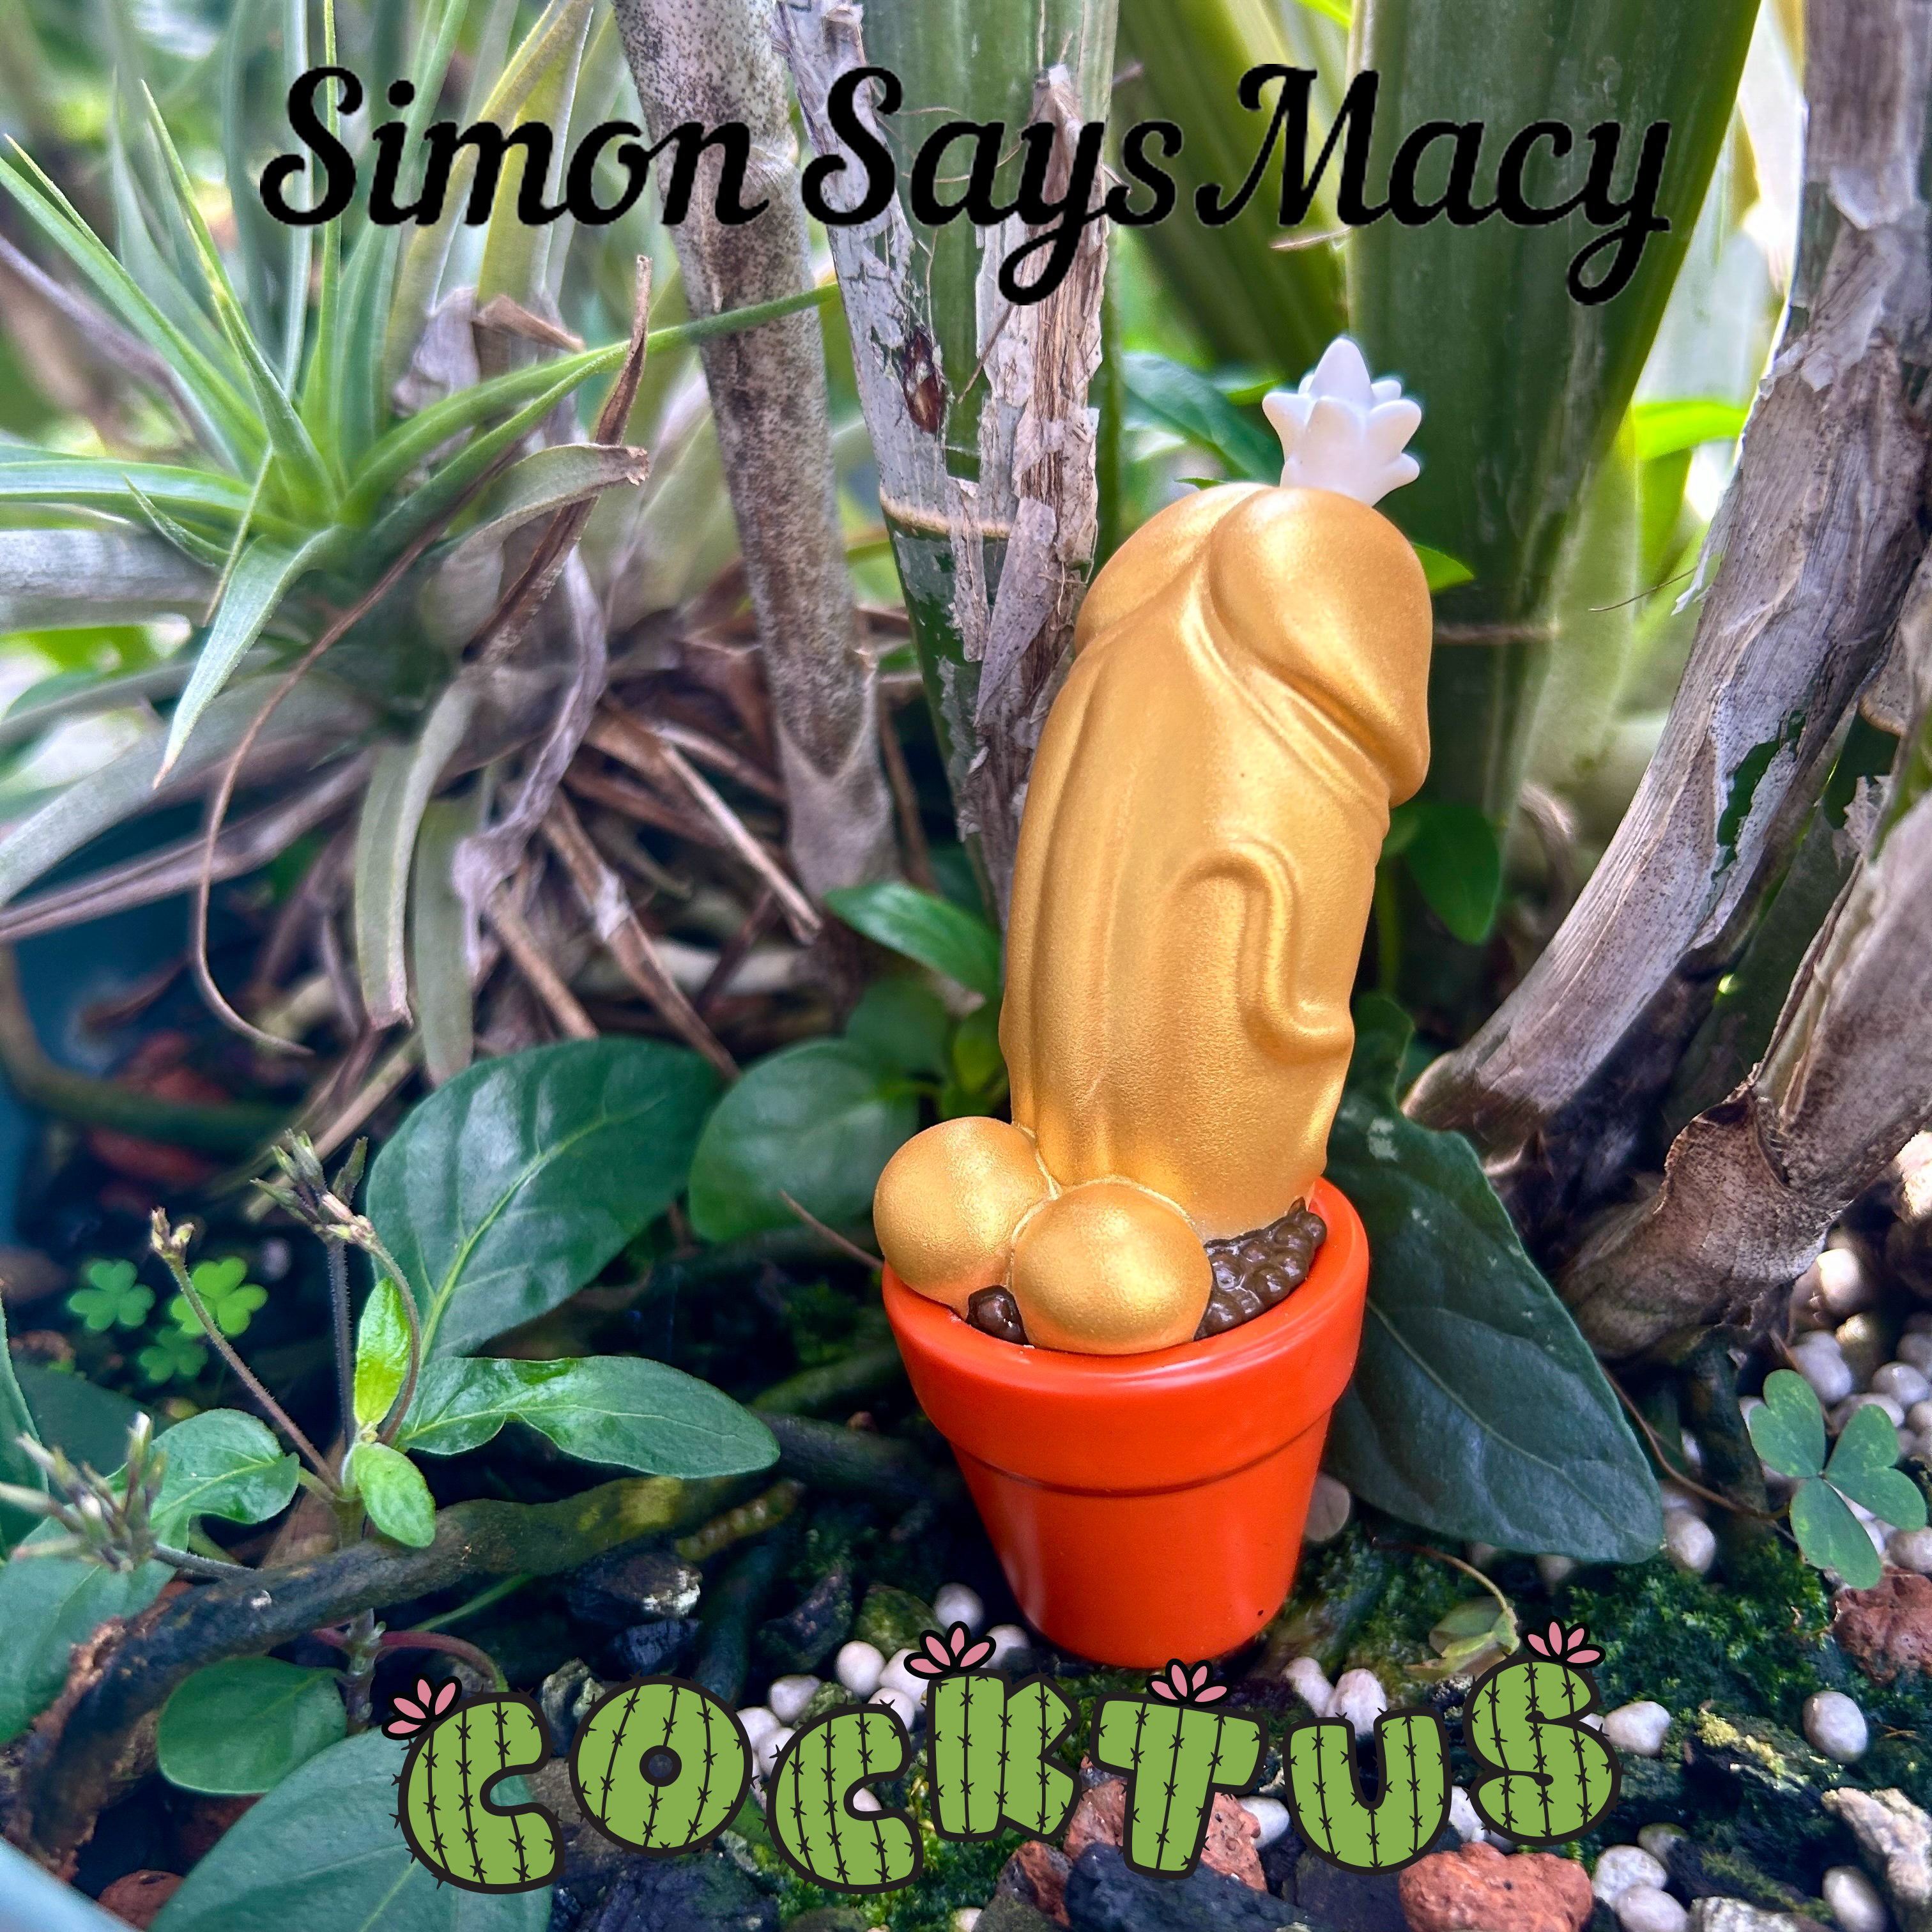 Cocktus - Gold-member by Simon Says Macy, a gold cactus in a pot, 3.5 tall, limited to 200pcs, for display purposes only!